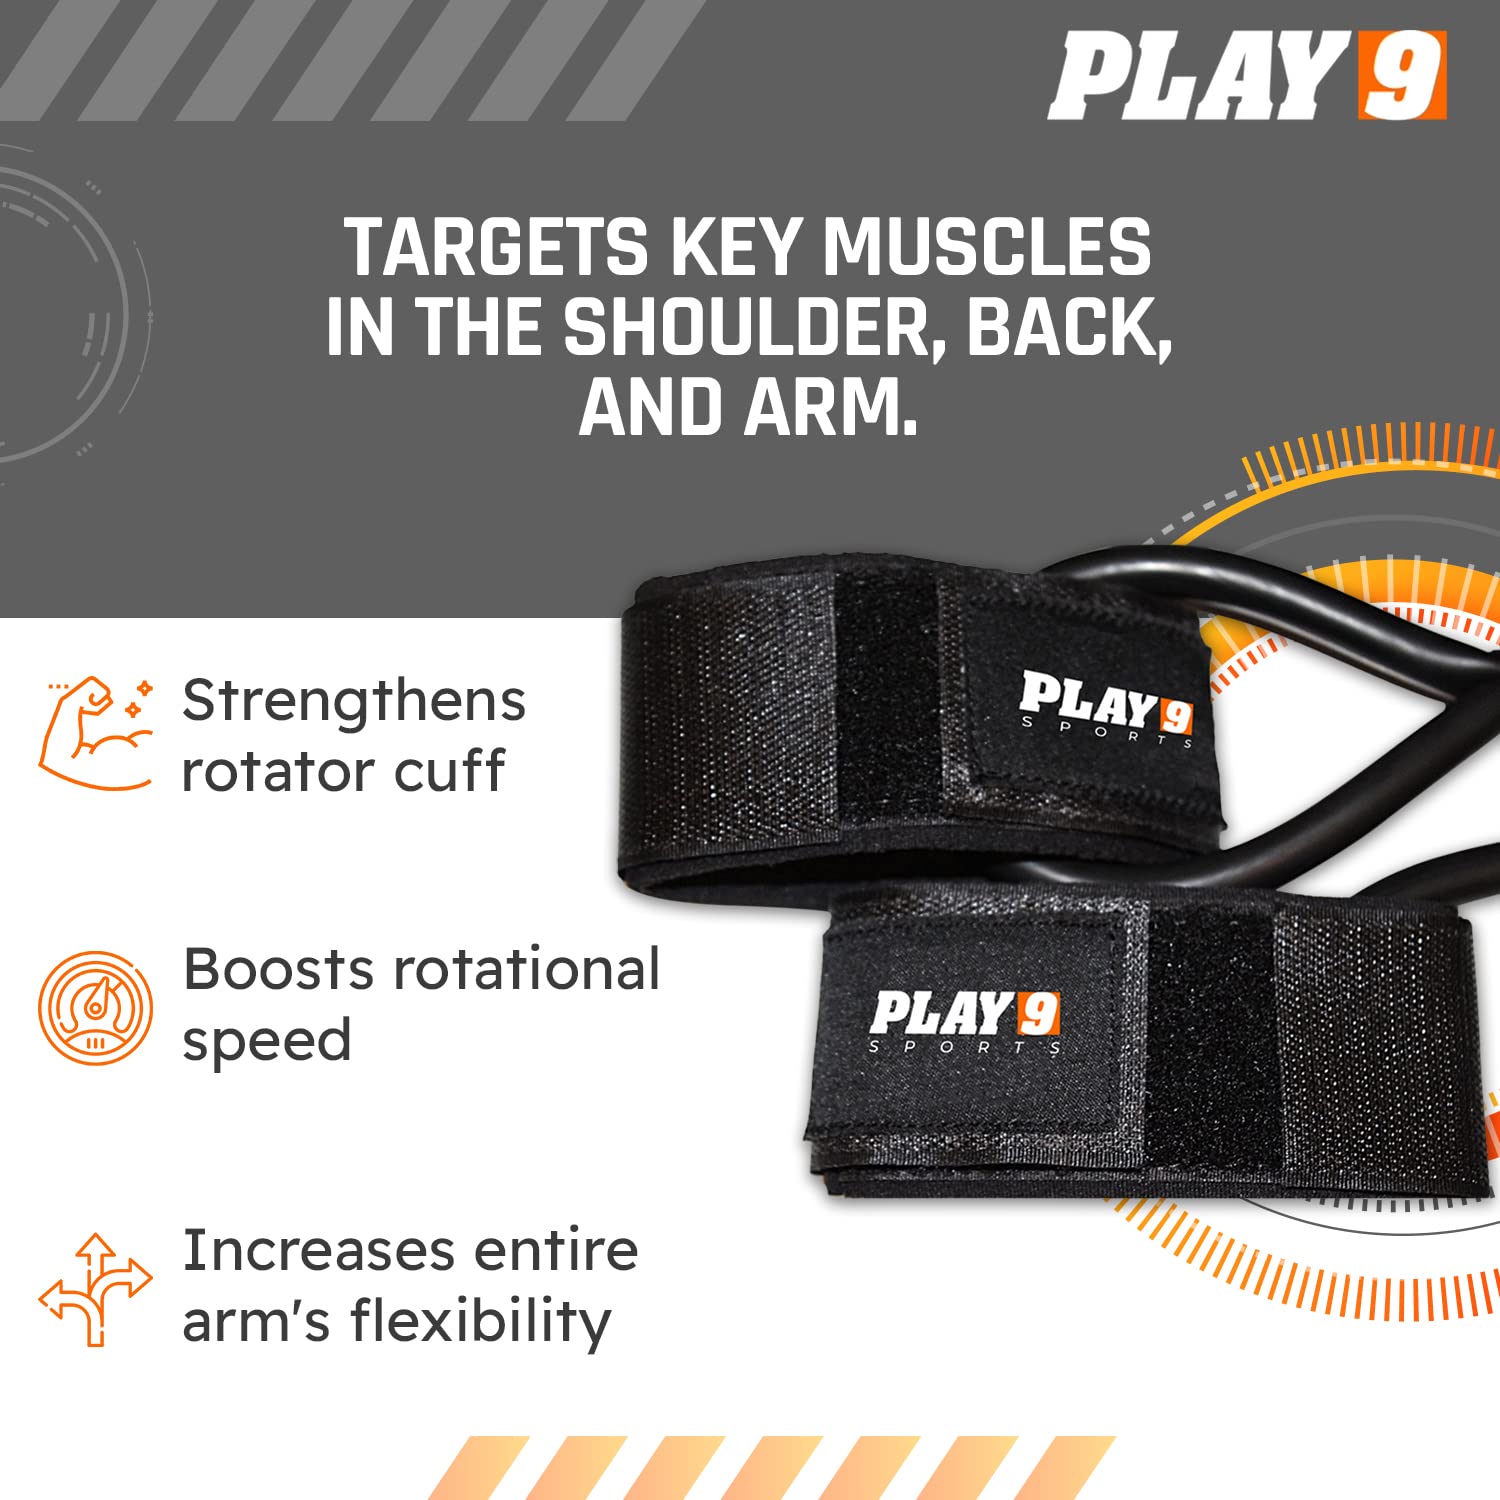 Play 9 Sports Resistance Exercise Bands (Youth) Baseball Activation Elastic Training Athletes Equipment Bands - Opticdeals